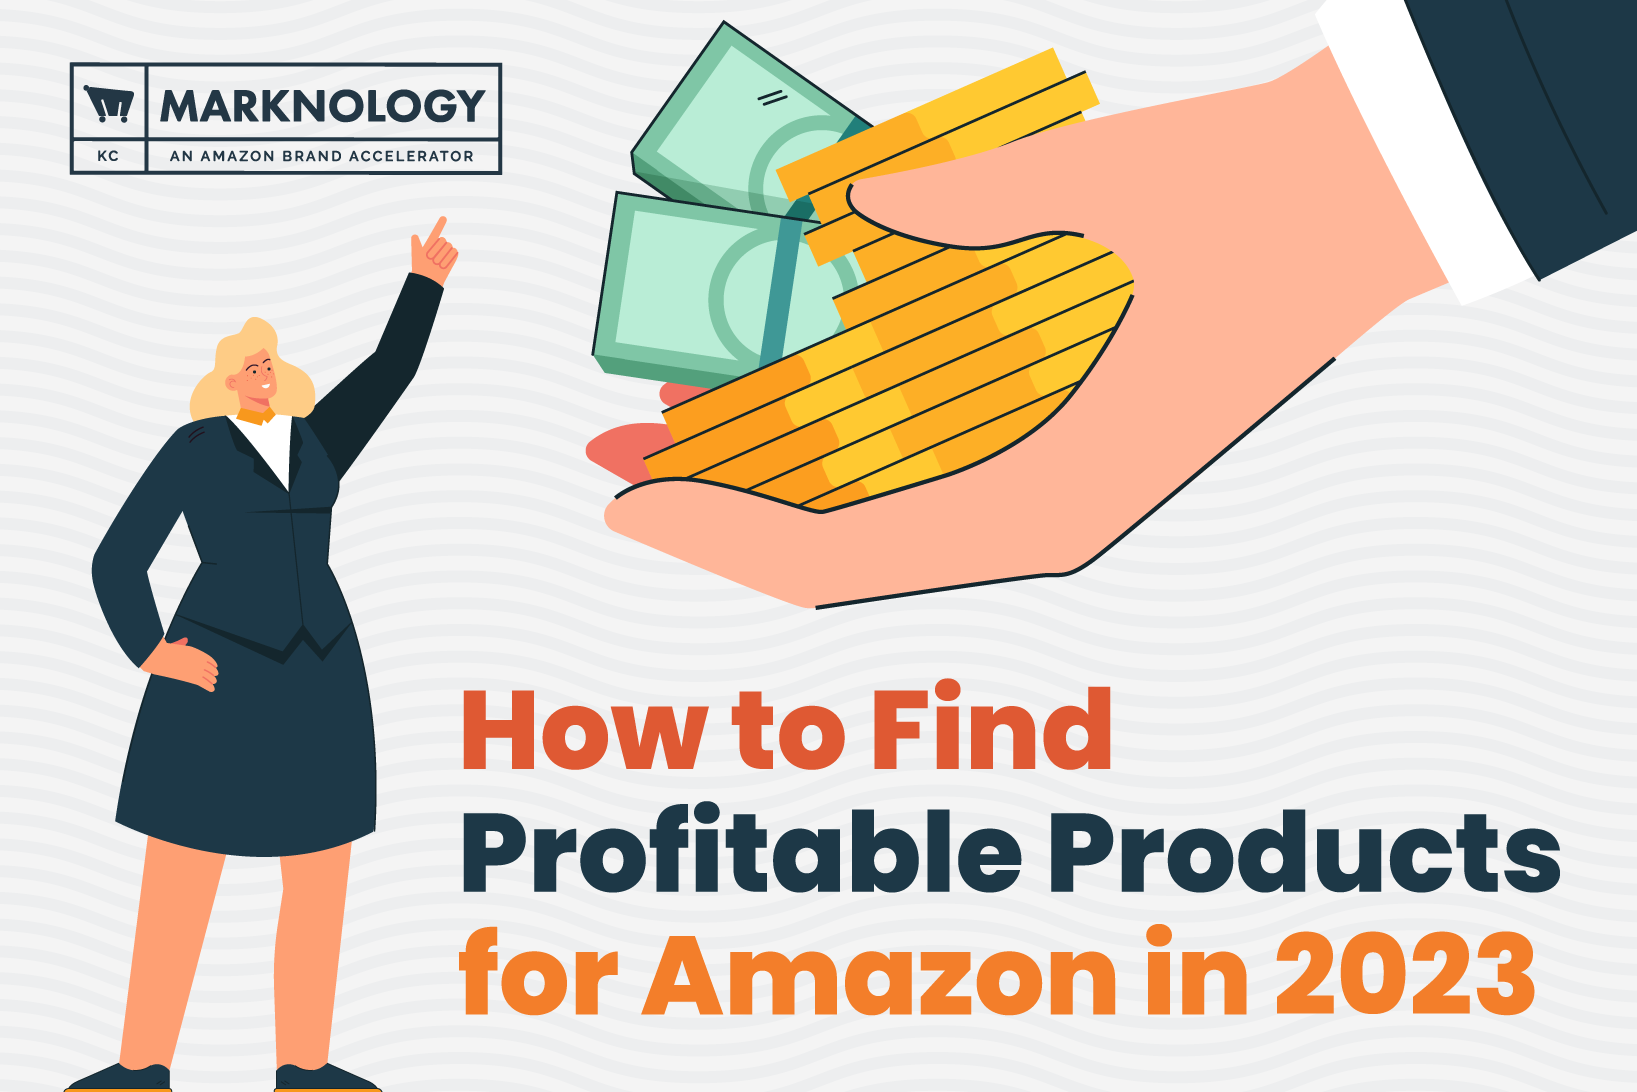 How to Find Profitable Products for Amazon in 2023